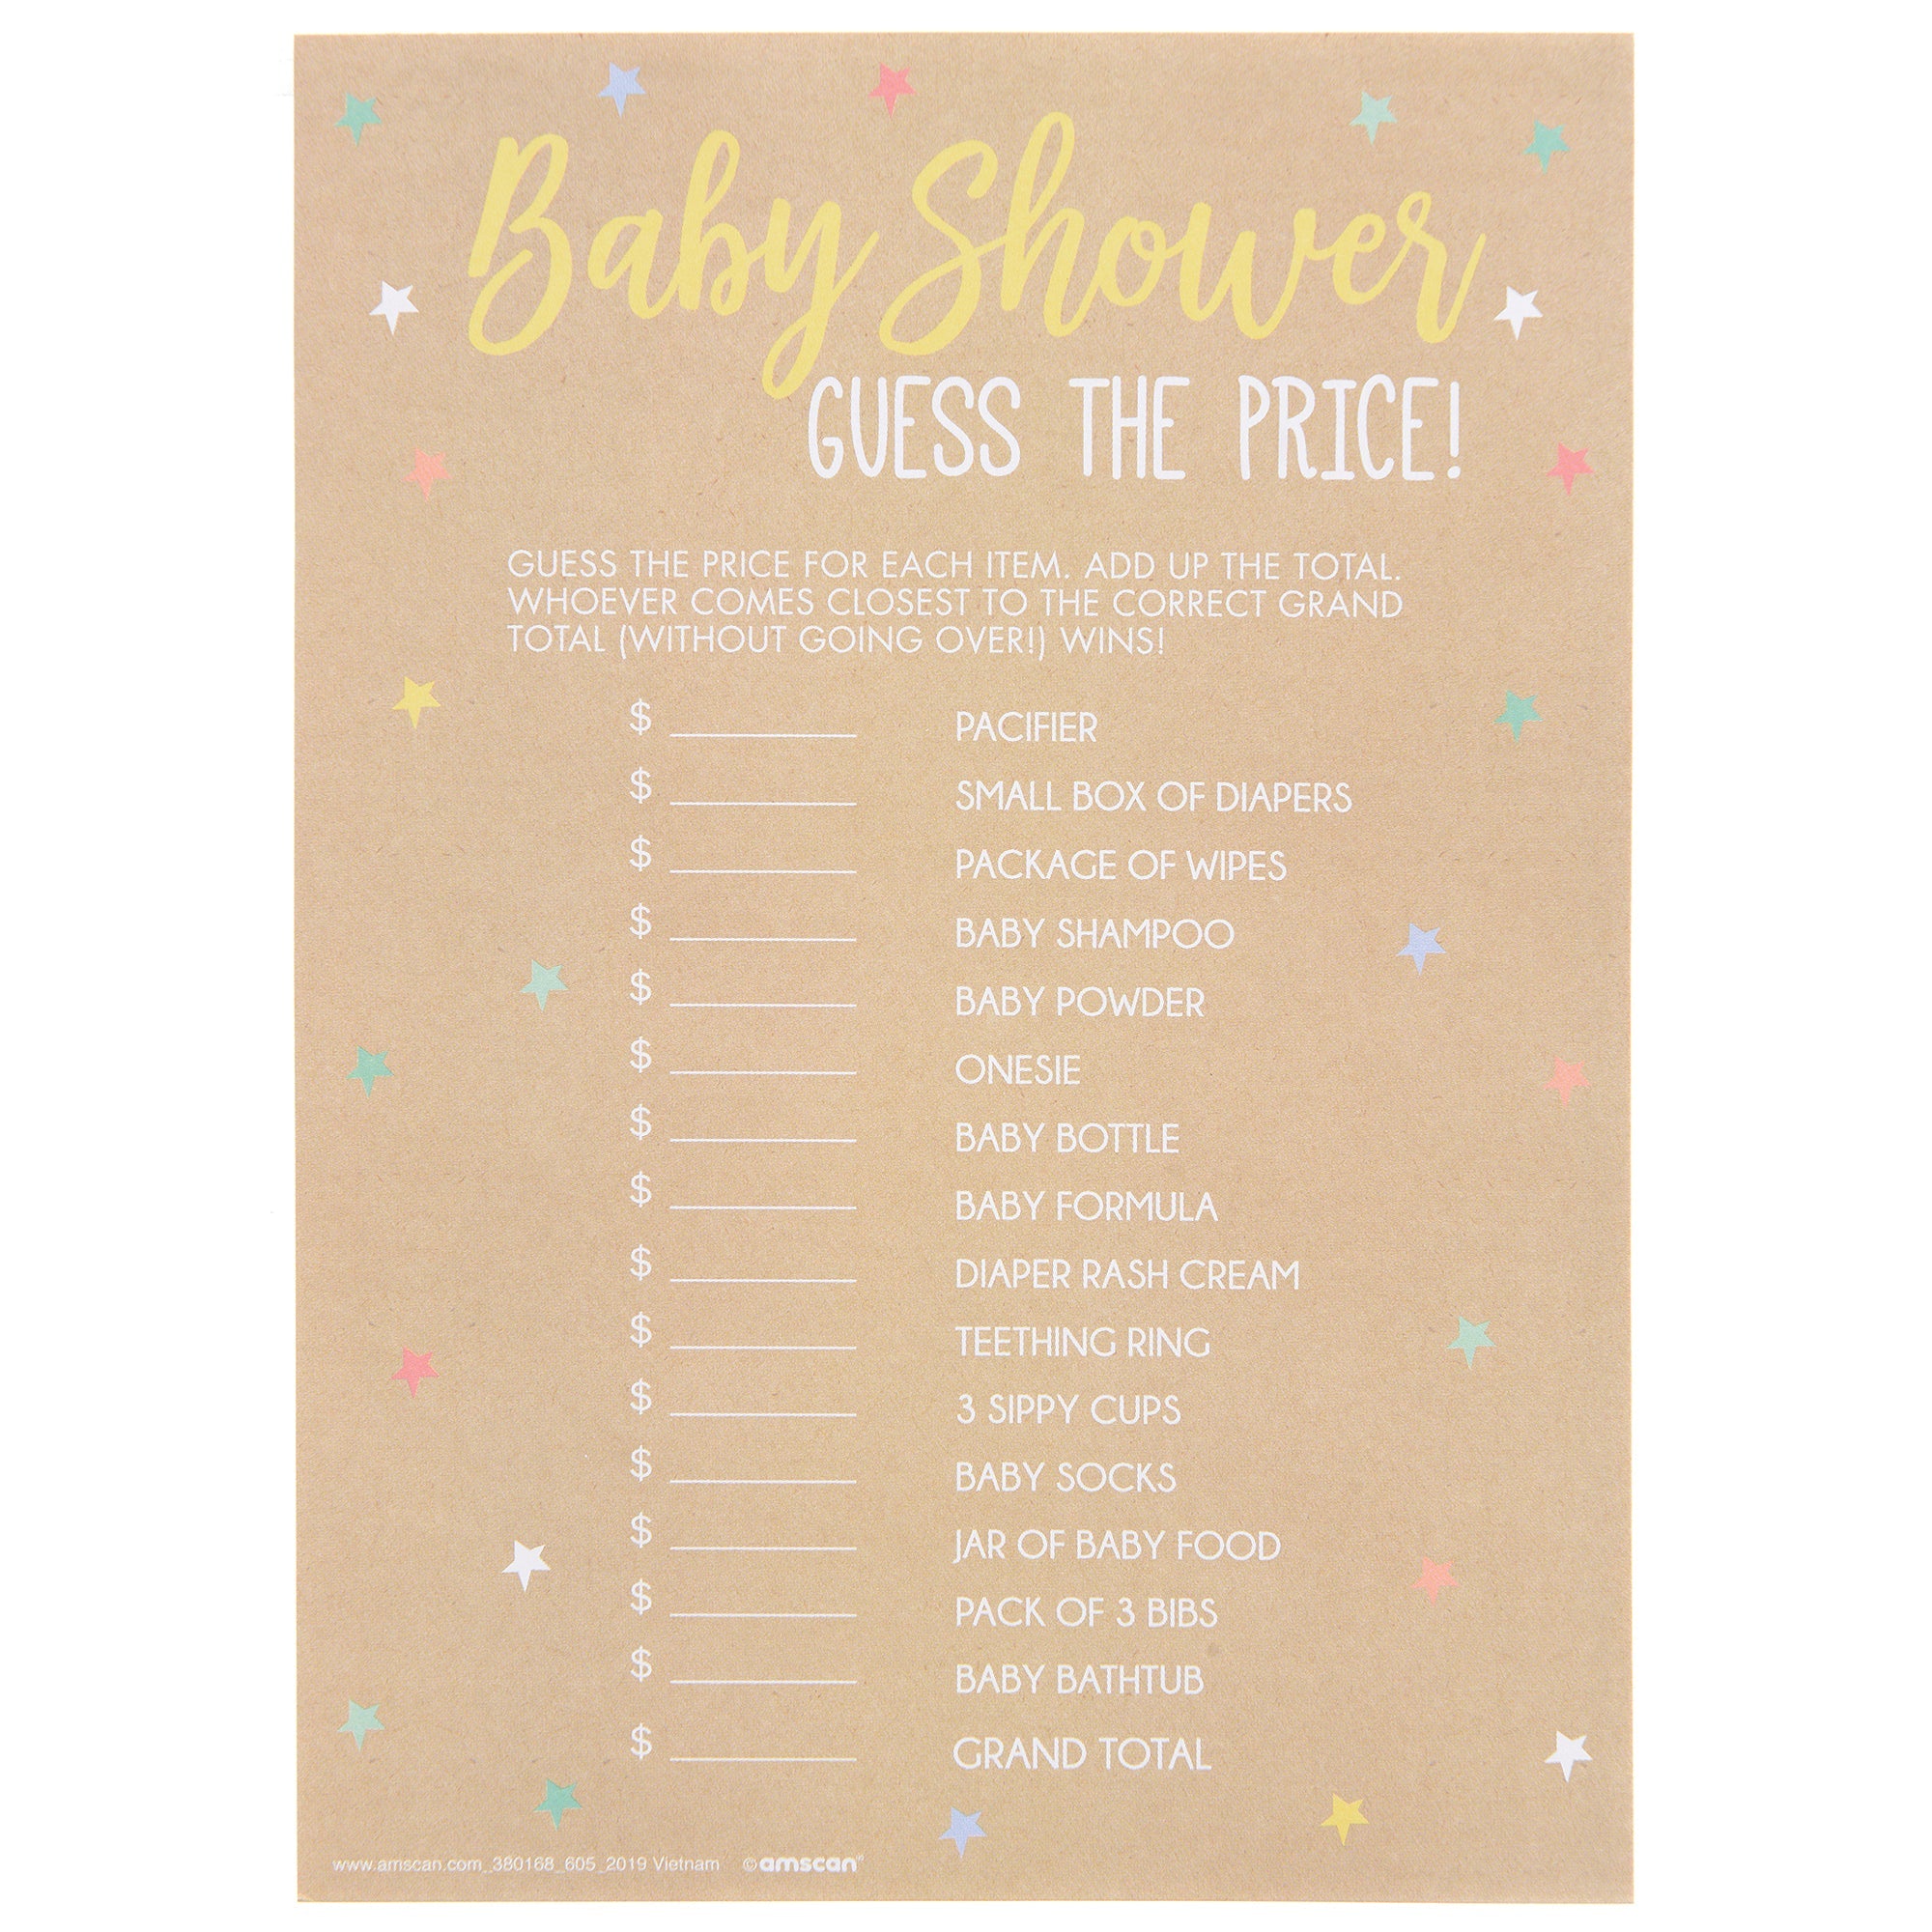 Baby Shower "Guess the Price"  24 Game sheets